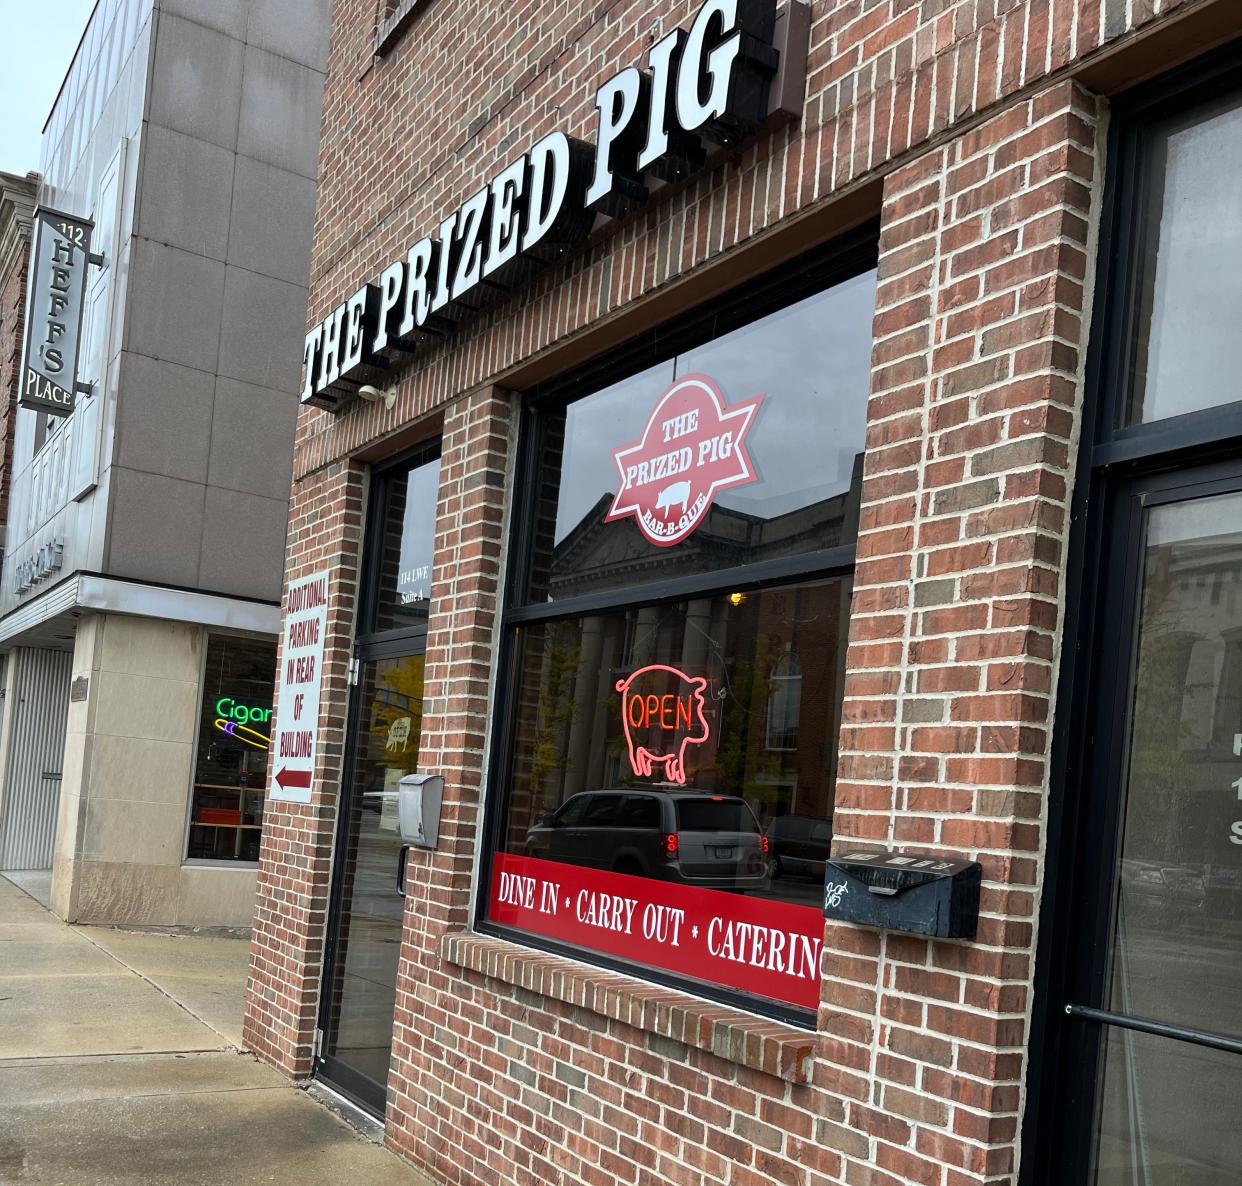 The Prized Pig in downtown Mishawaka could end up in a new home near the city's Battell Park in Mishawaka within the next year. It would share space with a pizza operator.